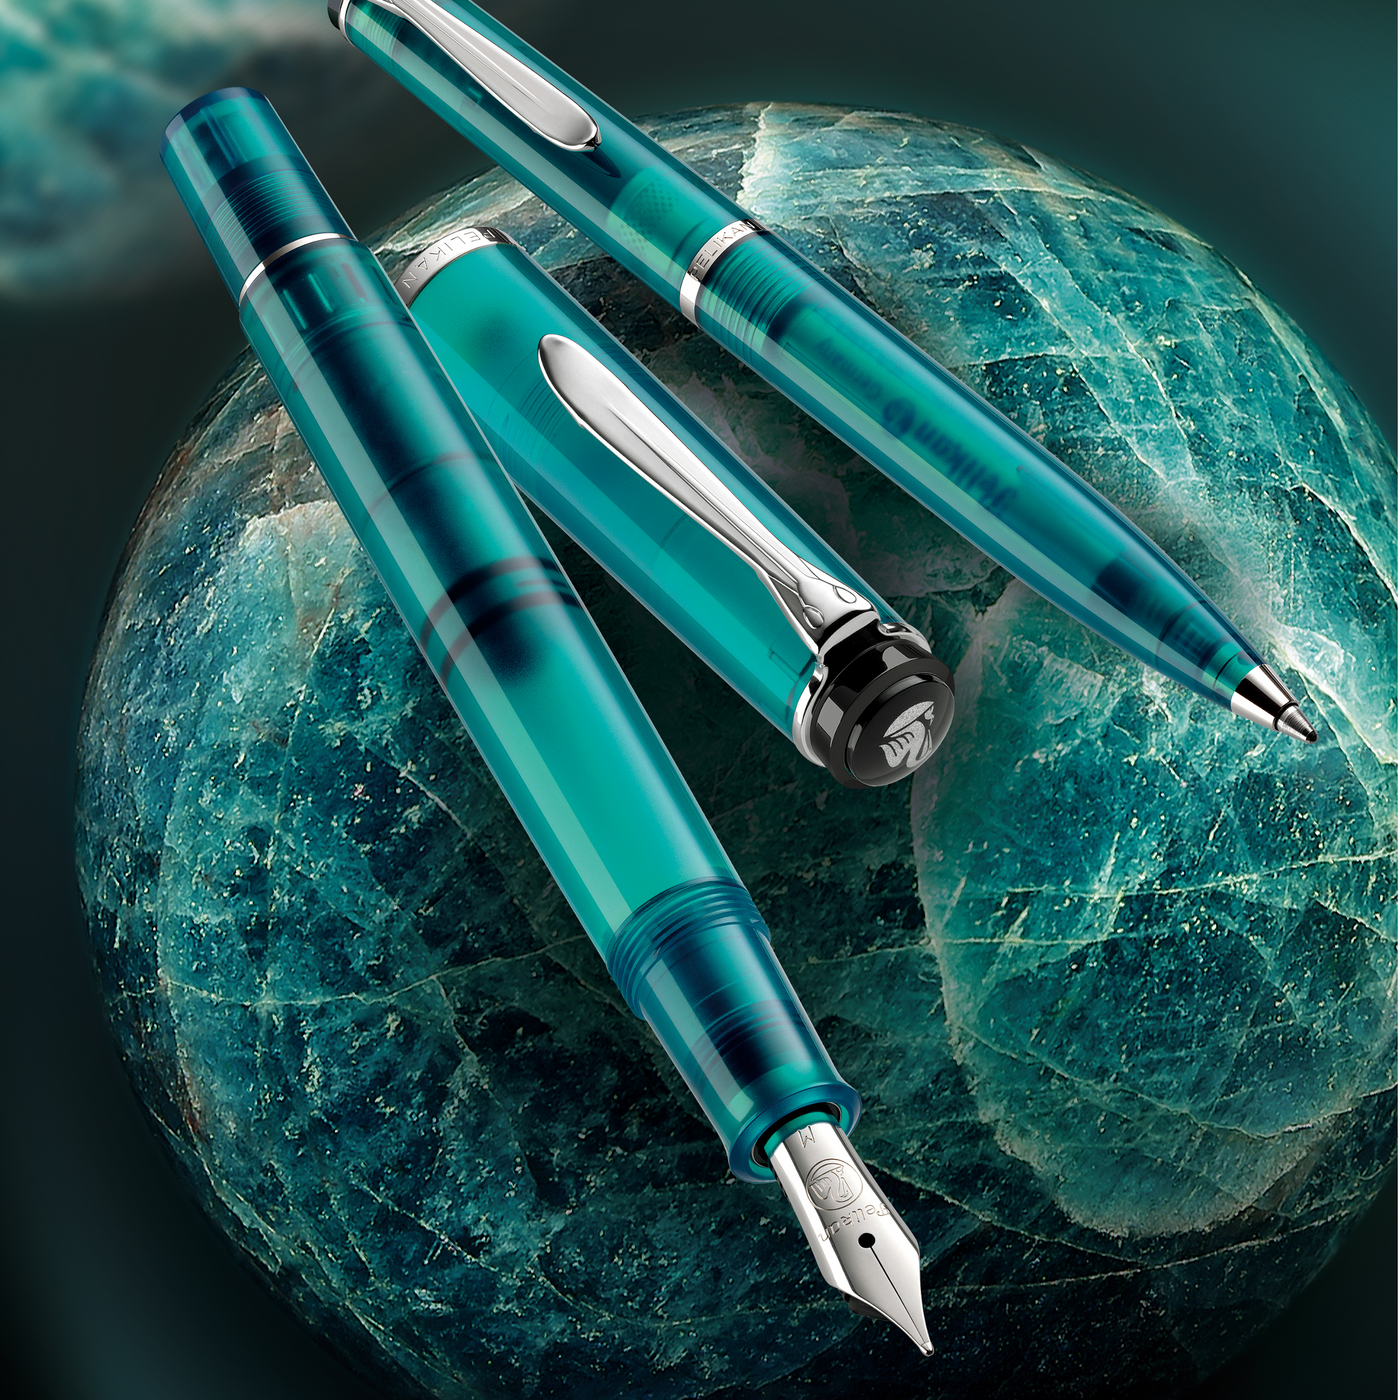 Pelikan Classic M205 Fountain Pen - Apatite Gift Set (Special Edition) | Atlas Stationers.